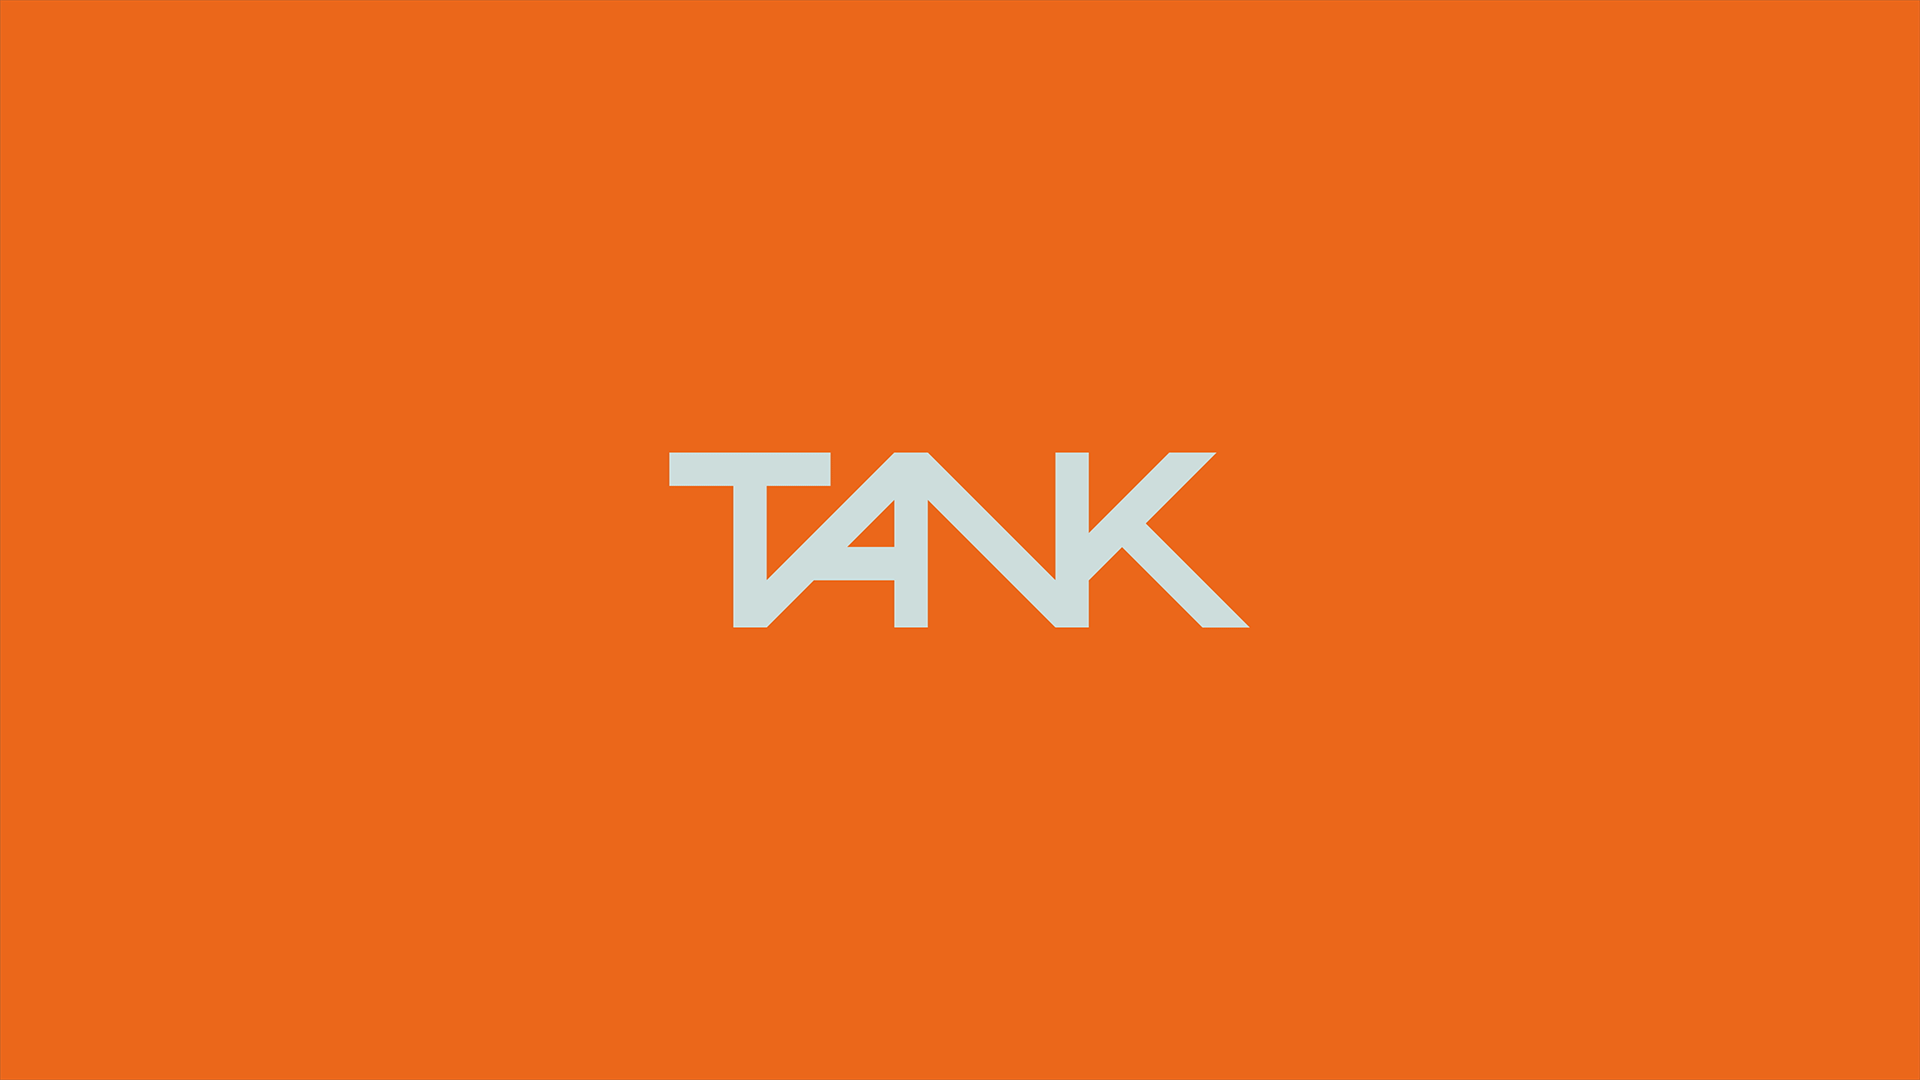 The TANK-U subbrand uses the letter U from .